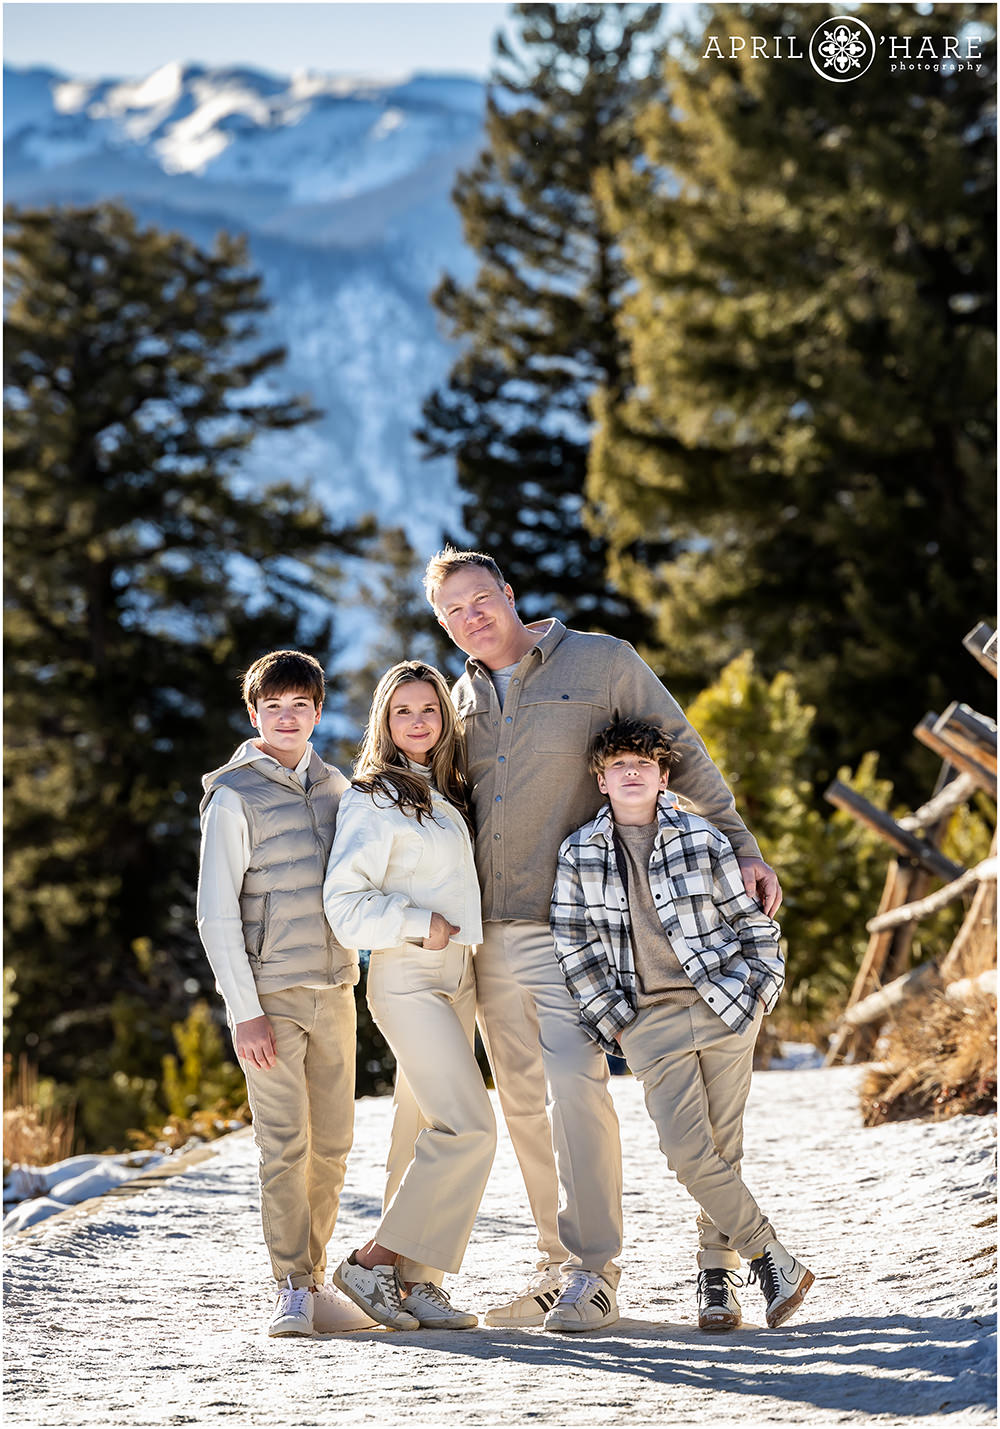 Bright sunny Colorado family portrait during winter at Sapphire Point